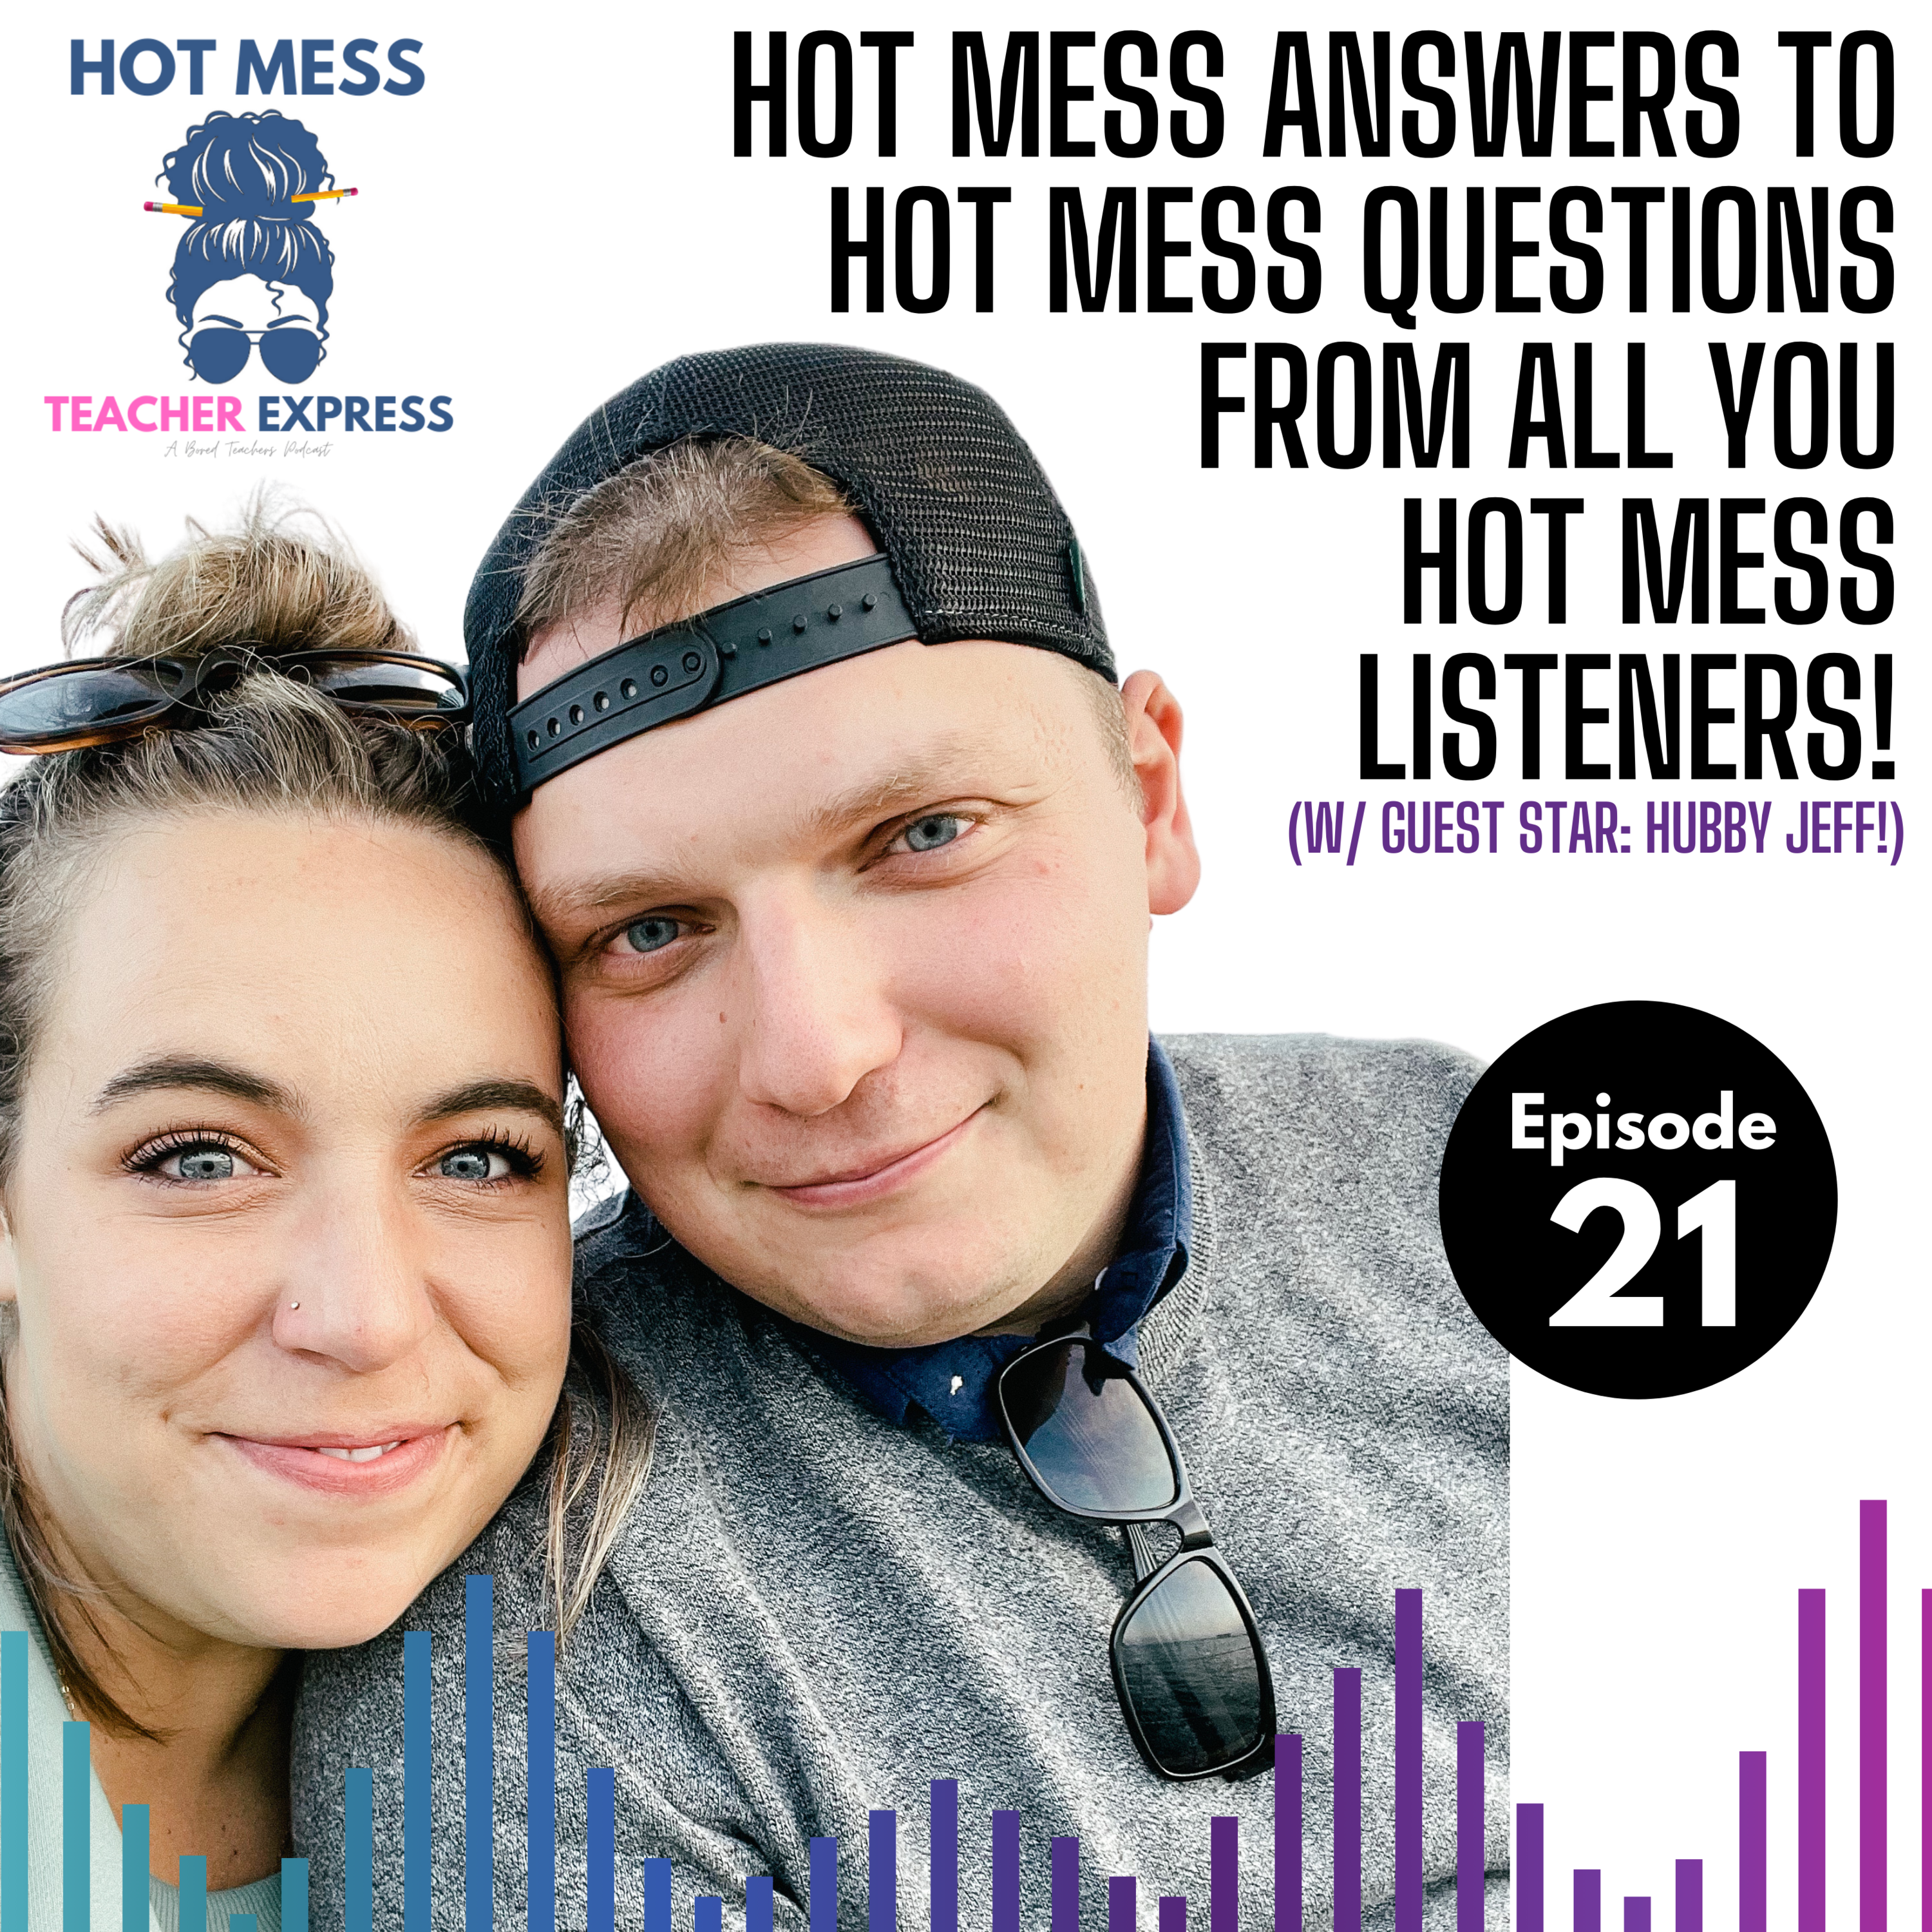 Episode #21 - Hot Mess Answers to Hot Mess Questions From YOU Hot Messes Out There (with guest star: hubby Jeff!)